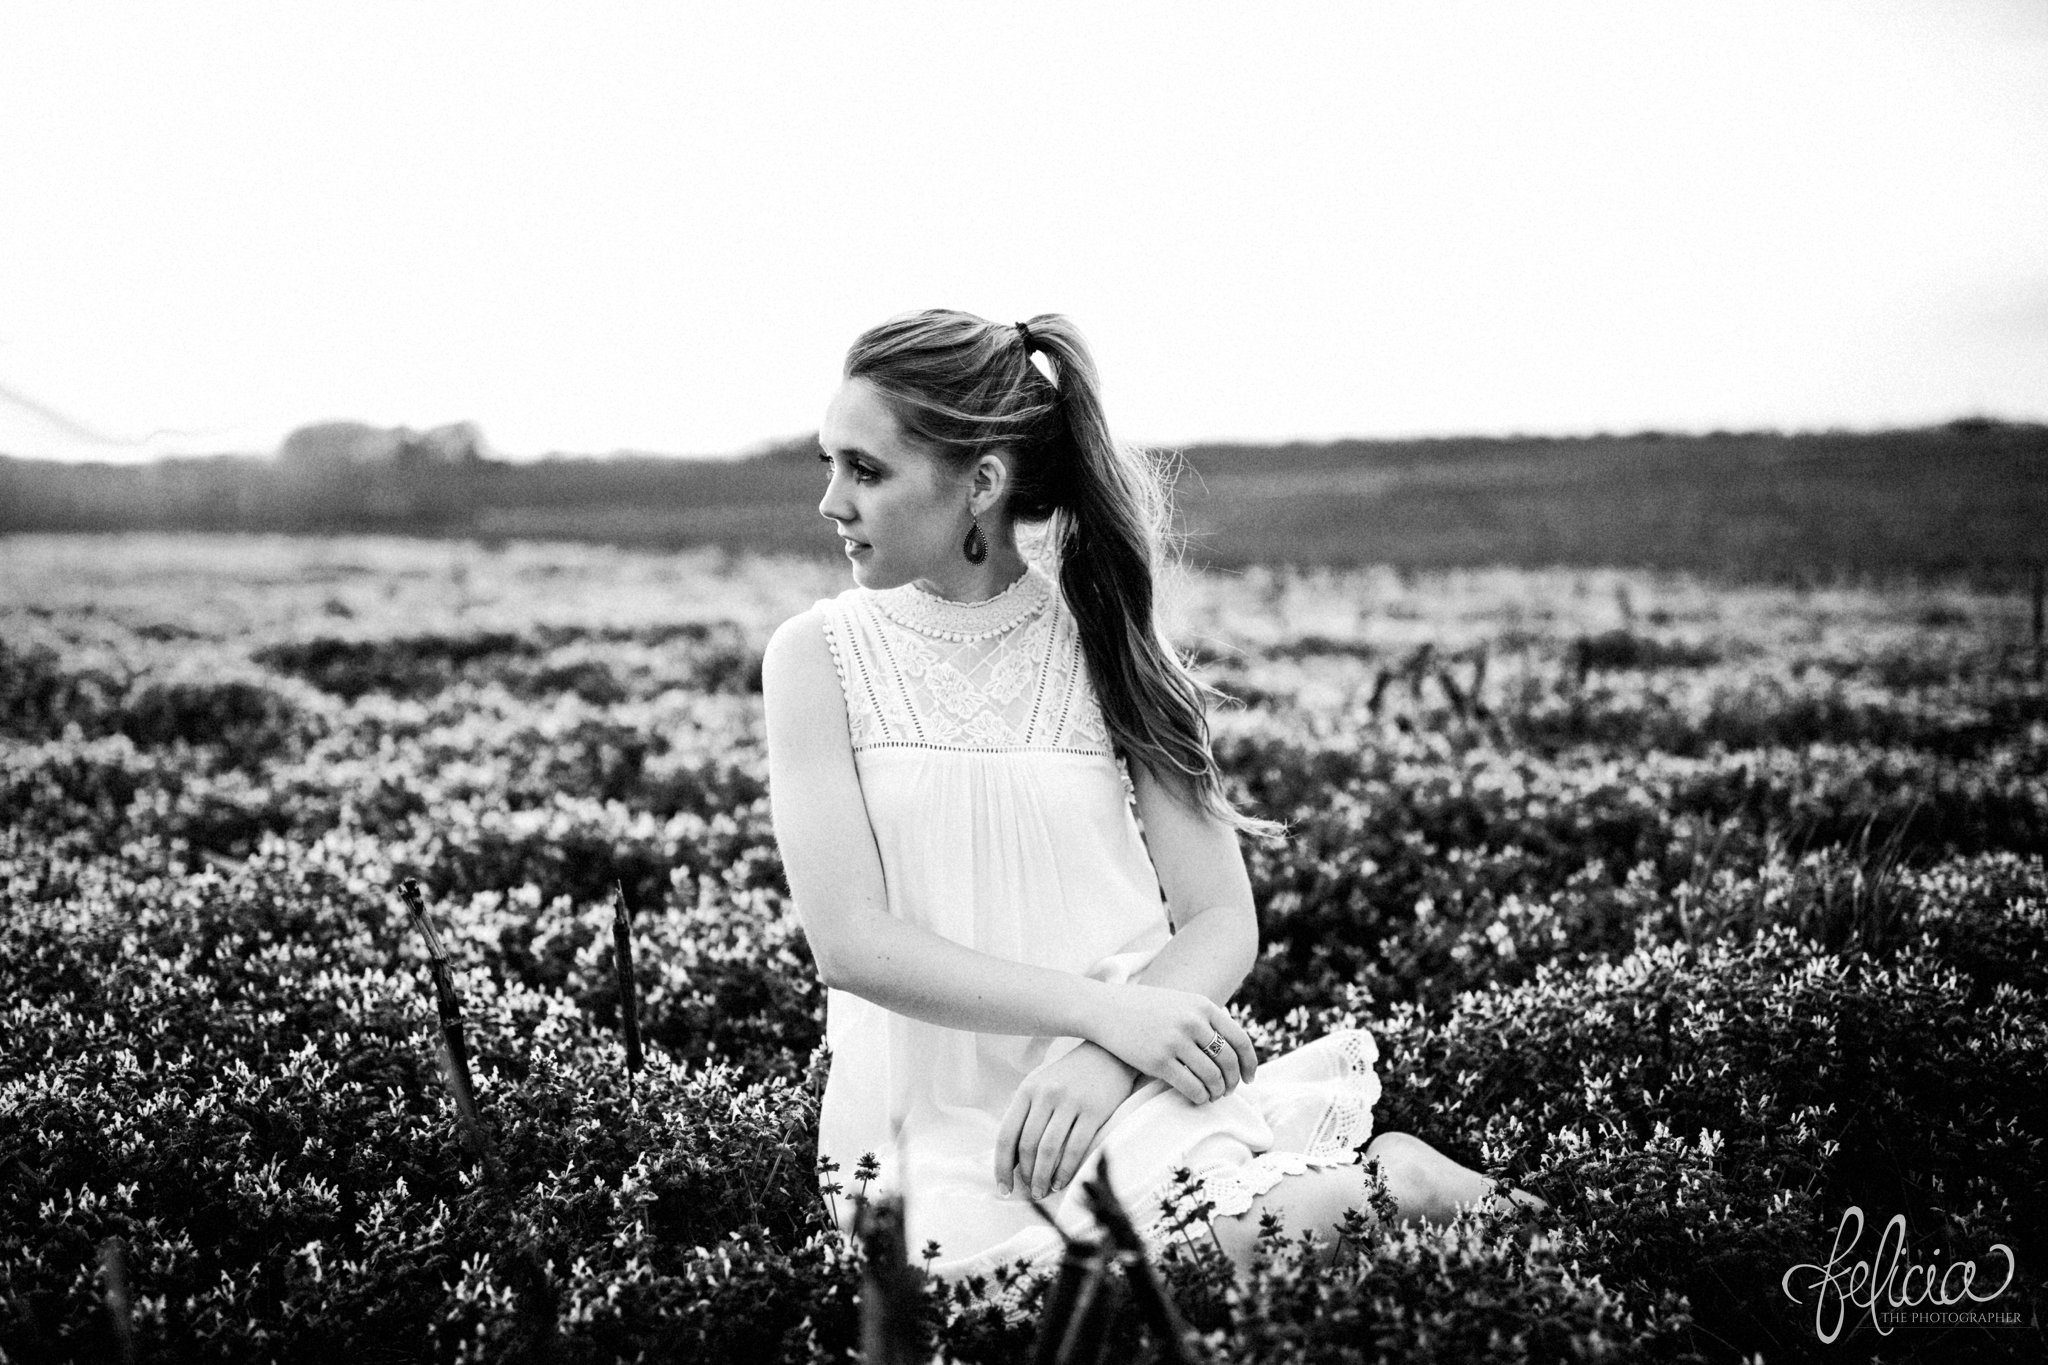 black and white | senior pictures | images by feliciathephotographer.com | Kansas City | rustic | long blonde hair | nature background | white dress | elegant | dramatic | candid | dramatic pose | ponytail | flower field | sitting in flowers 